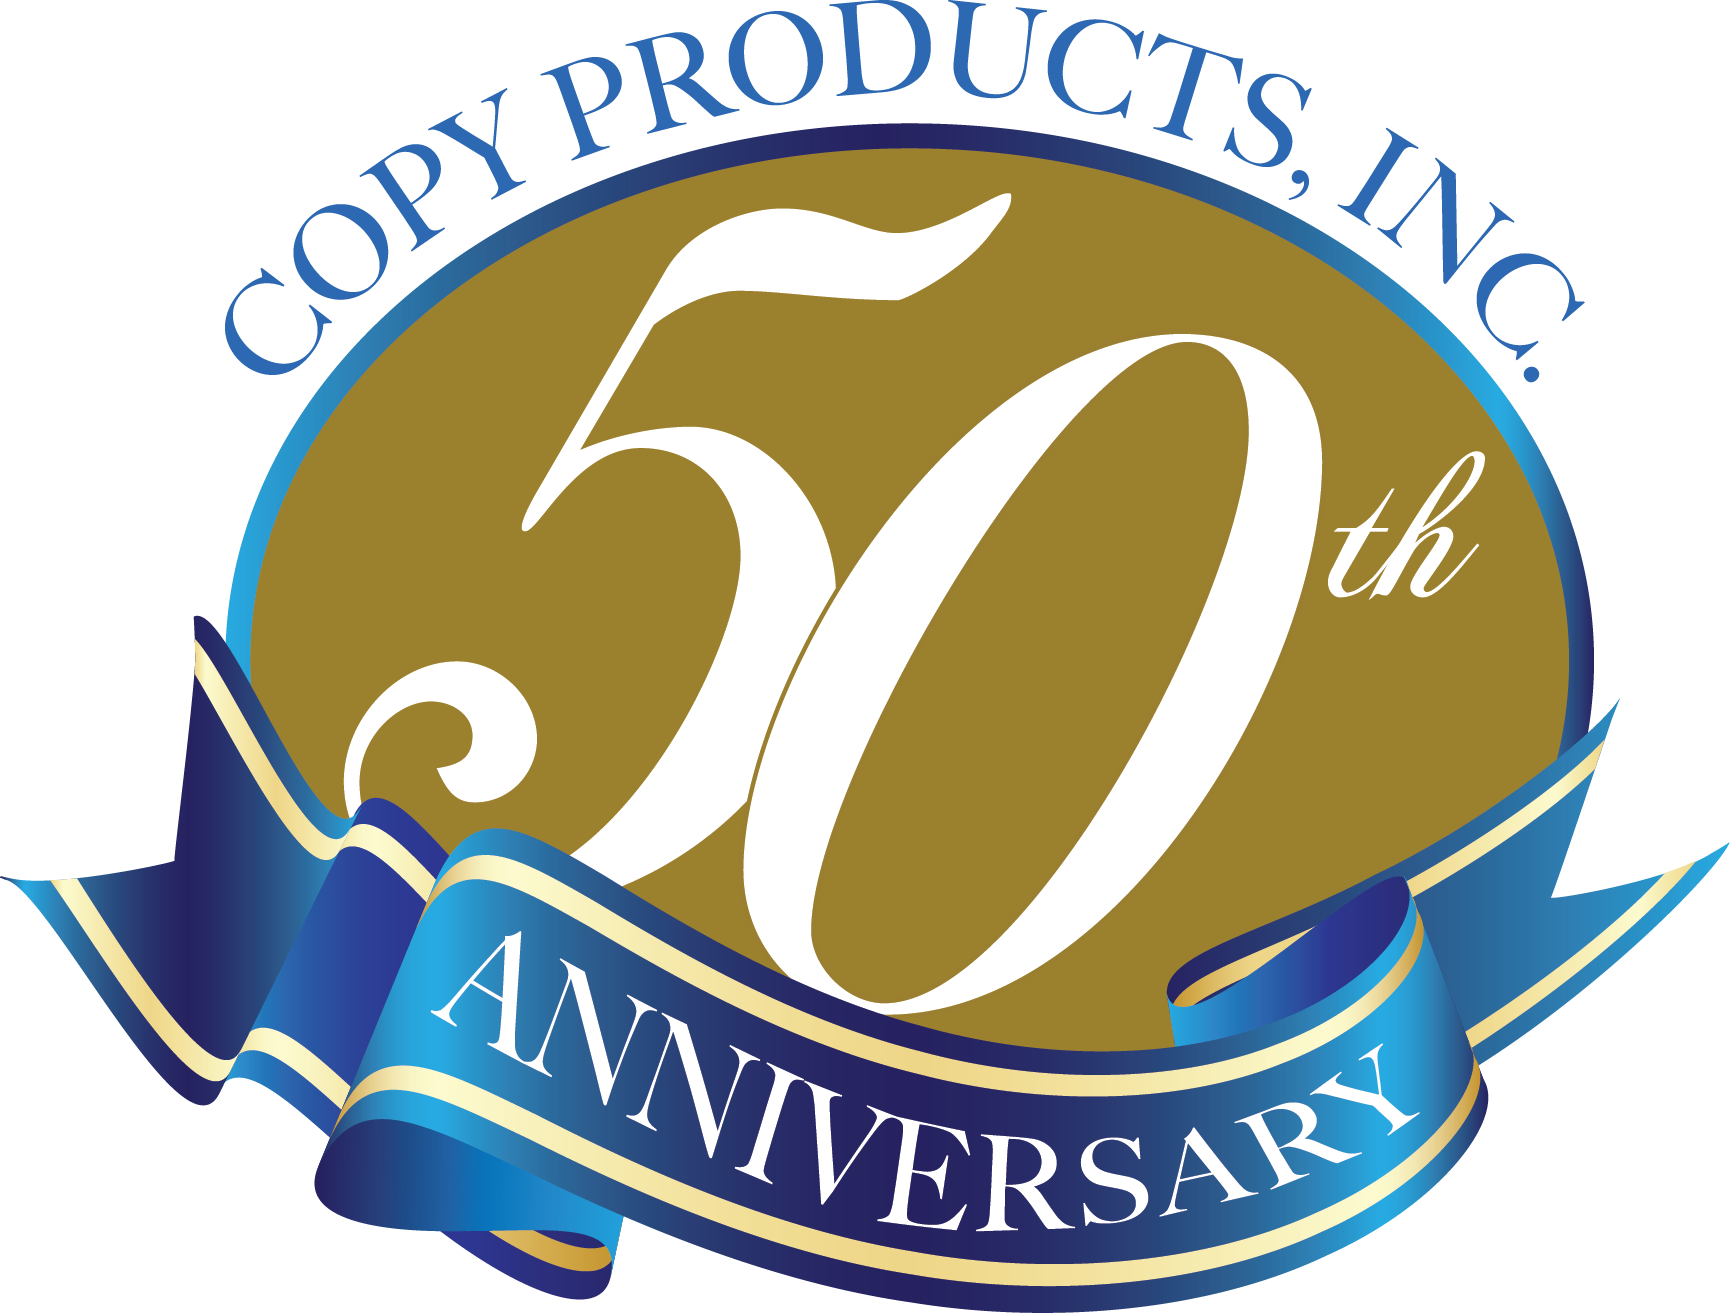 Copy Products, Inc 50th Anniversary